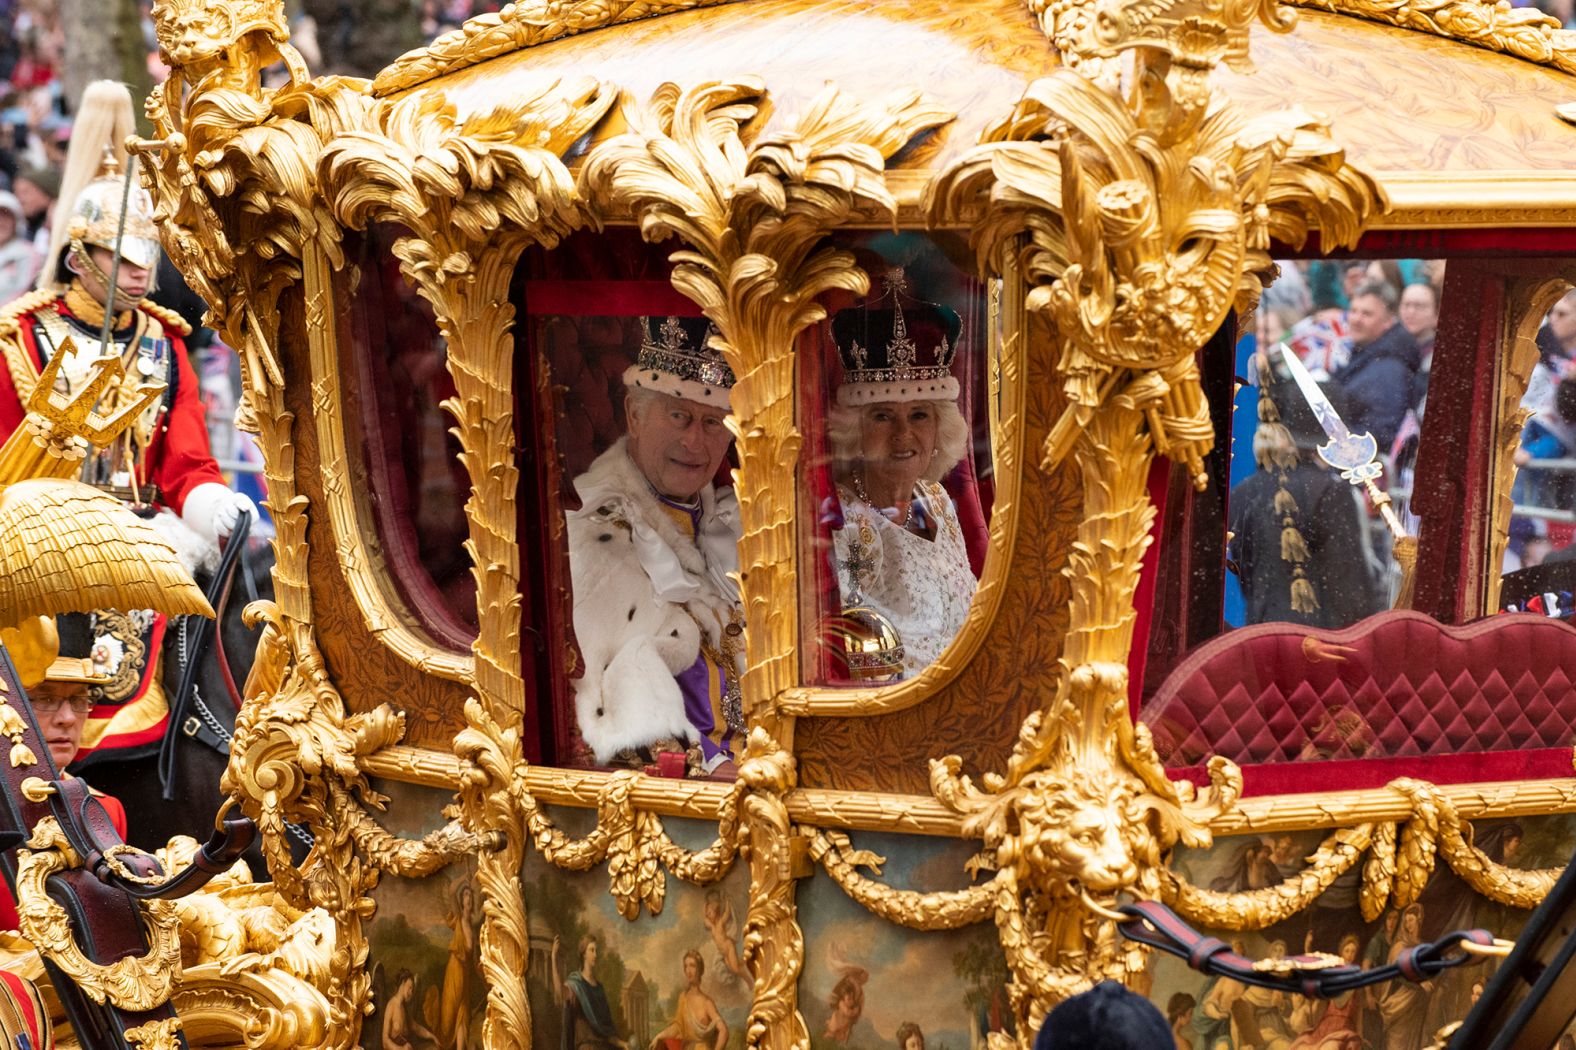 The Gold State Coach that carried the King and Queen <a href="index.php?page=&url=https%3A%2F%2Fwww.cnn.com%2Fuk%2Flive-news%2Fking-charles-iii-coronation-ckc-intl-gbr%2Fh_29ede4c8497c4ddfe0103e34a729b328" target="_blank">is incredibly heavy</a>, weighing 4 tons. Because of its weight, it can travel only at a walking pace.